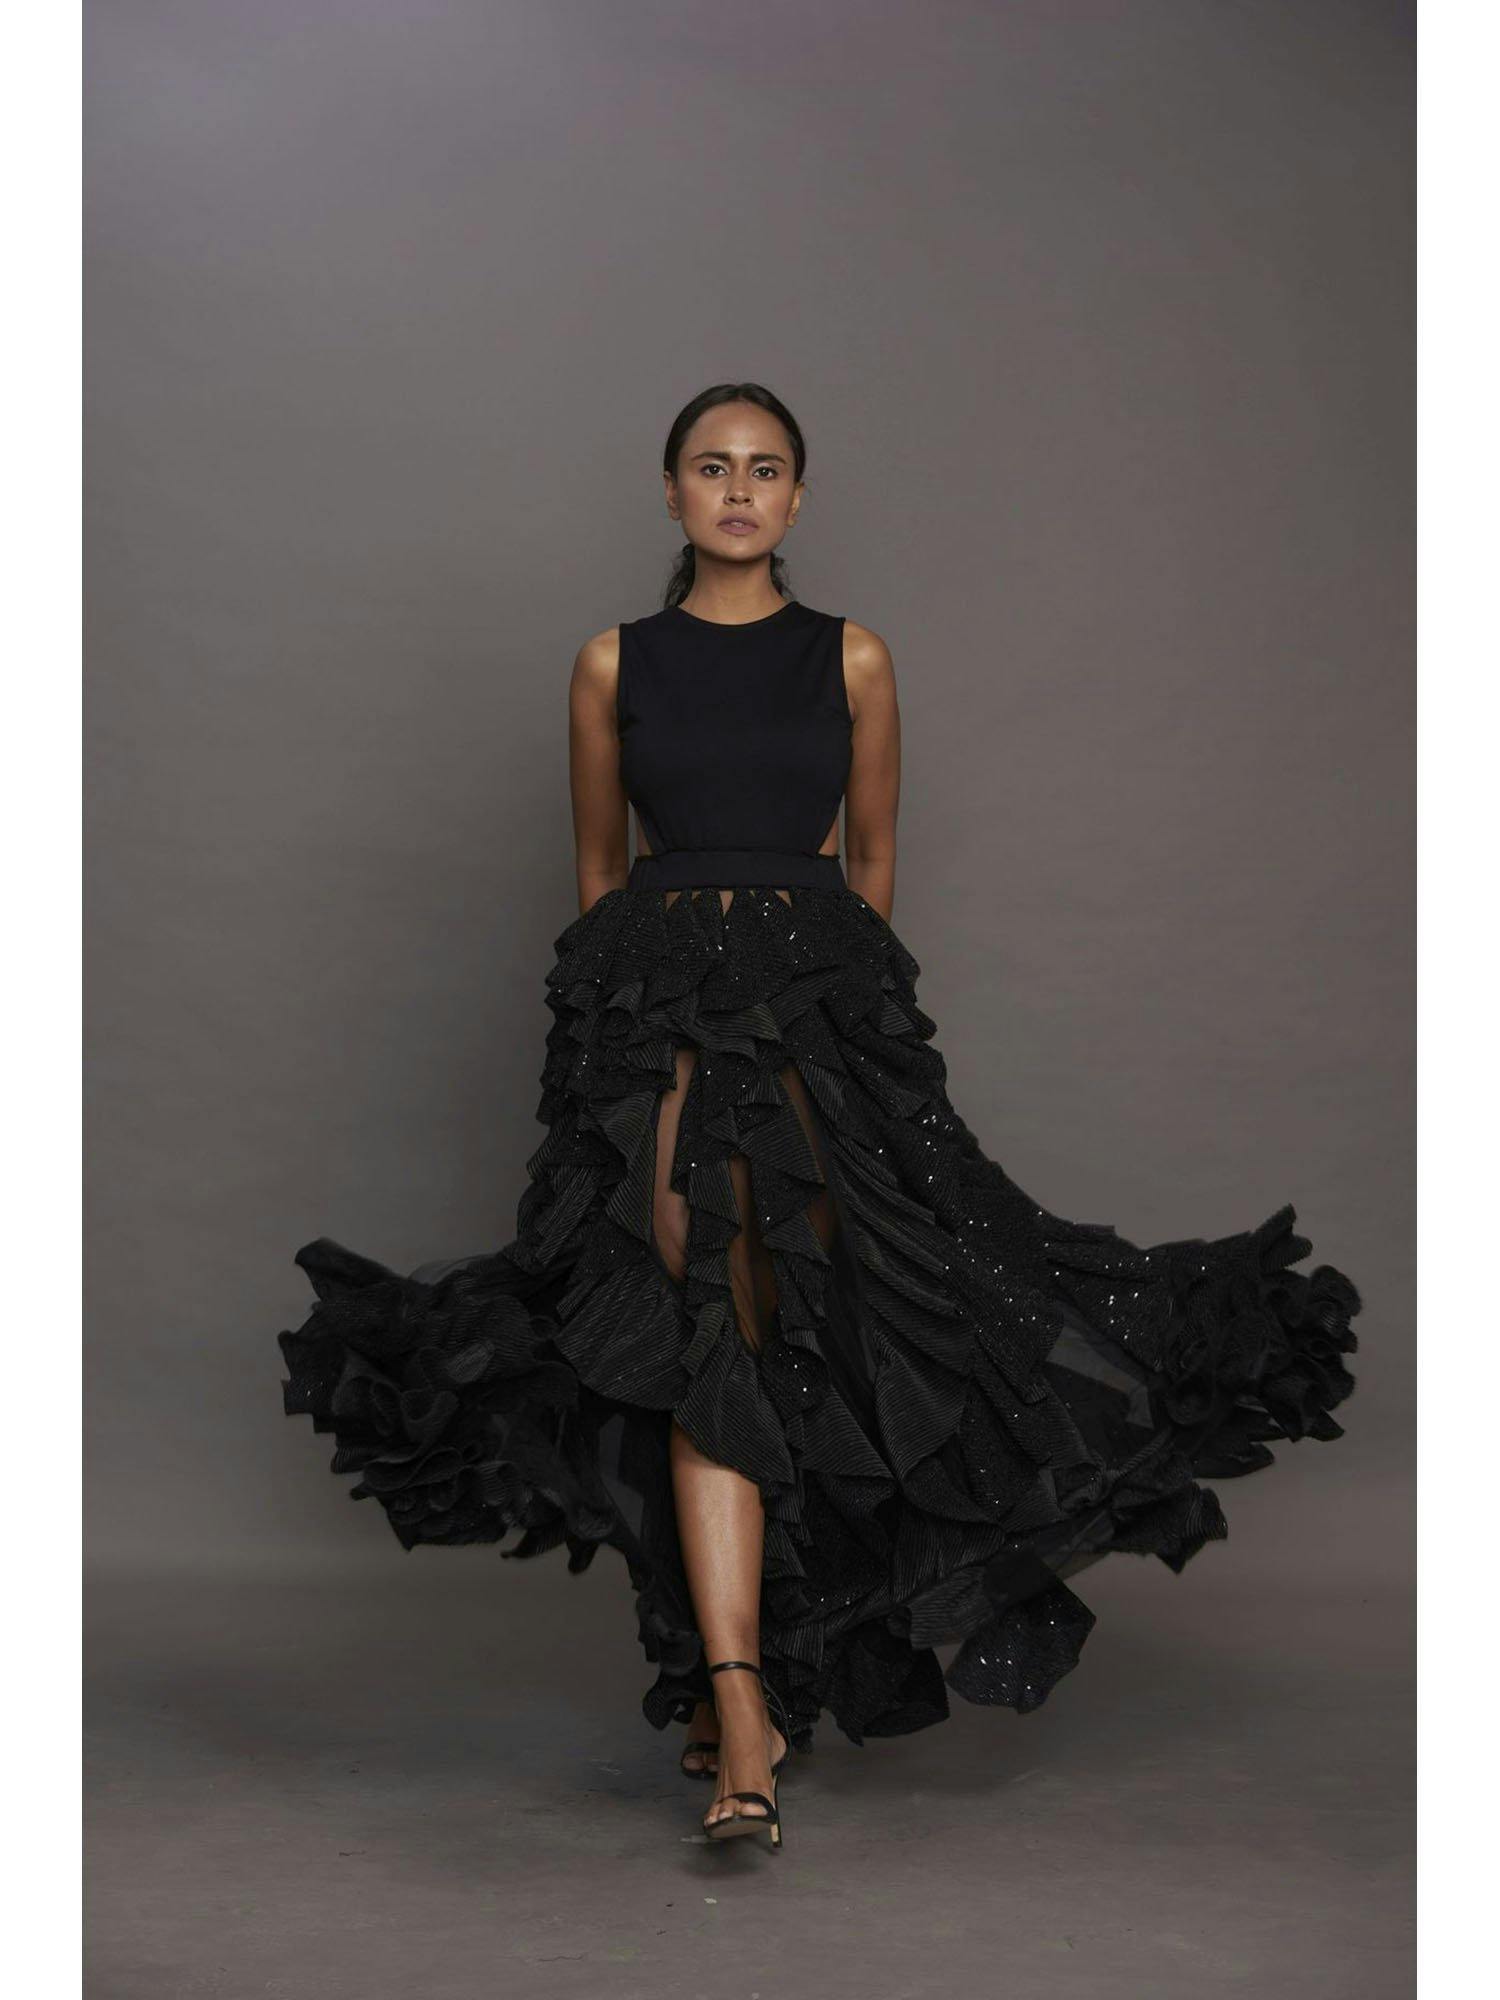 Black backless dress with ruffled bottom, a product by Deepika Arora